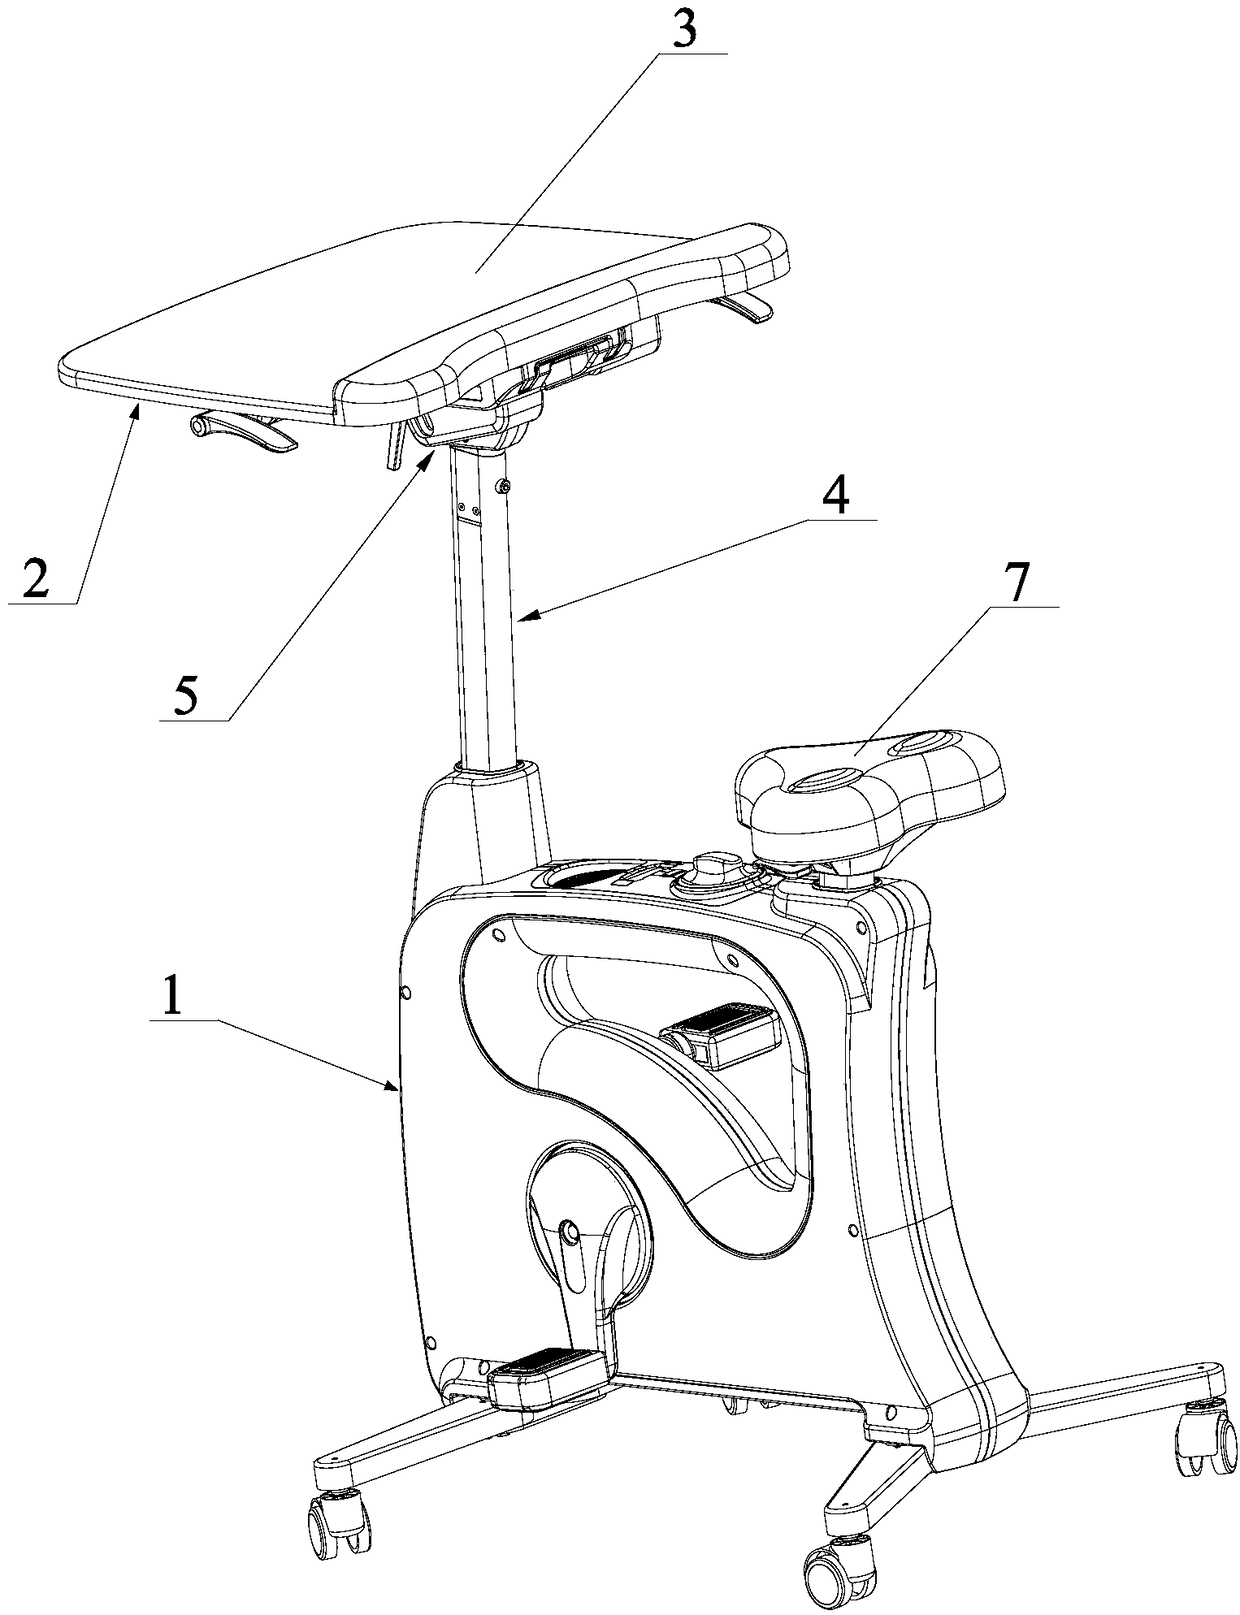 Exercise bike with table board